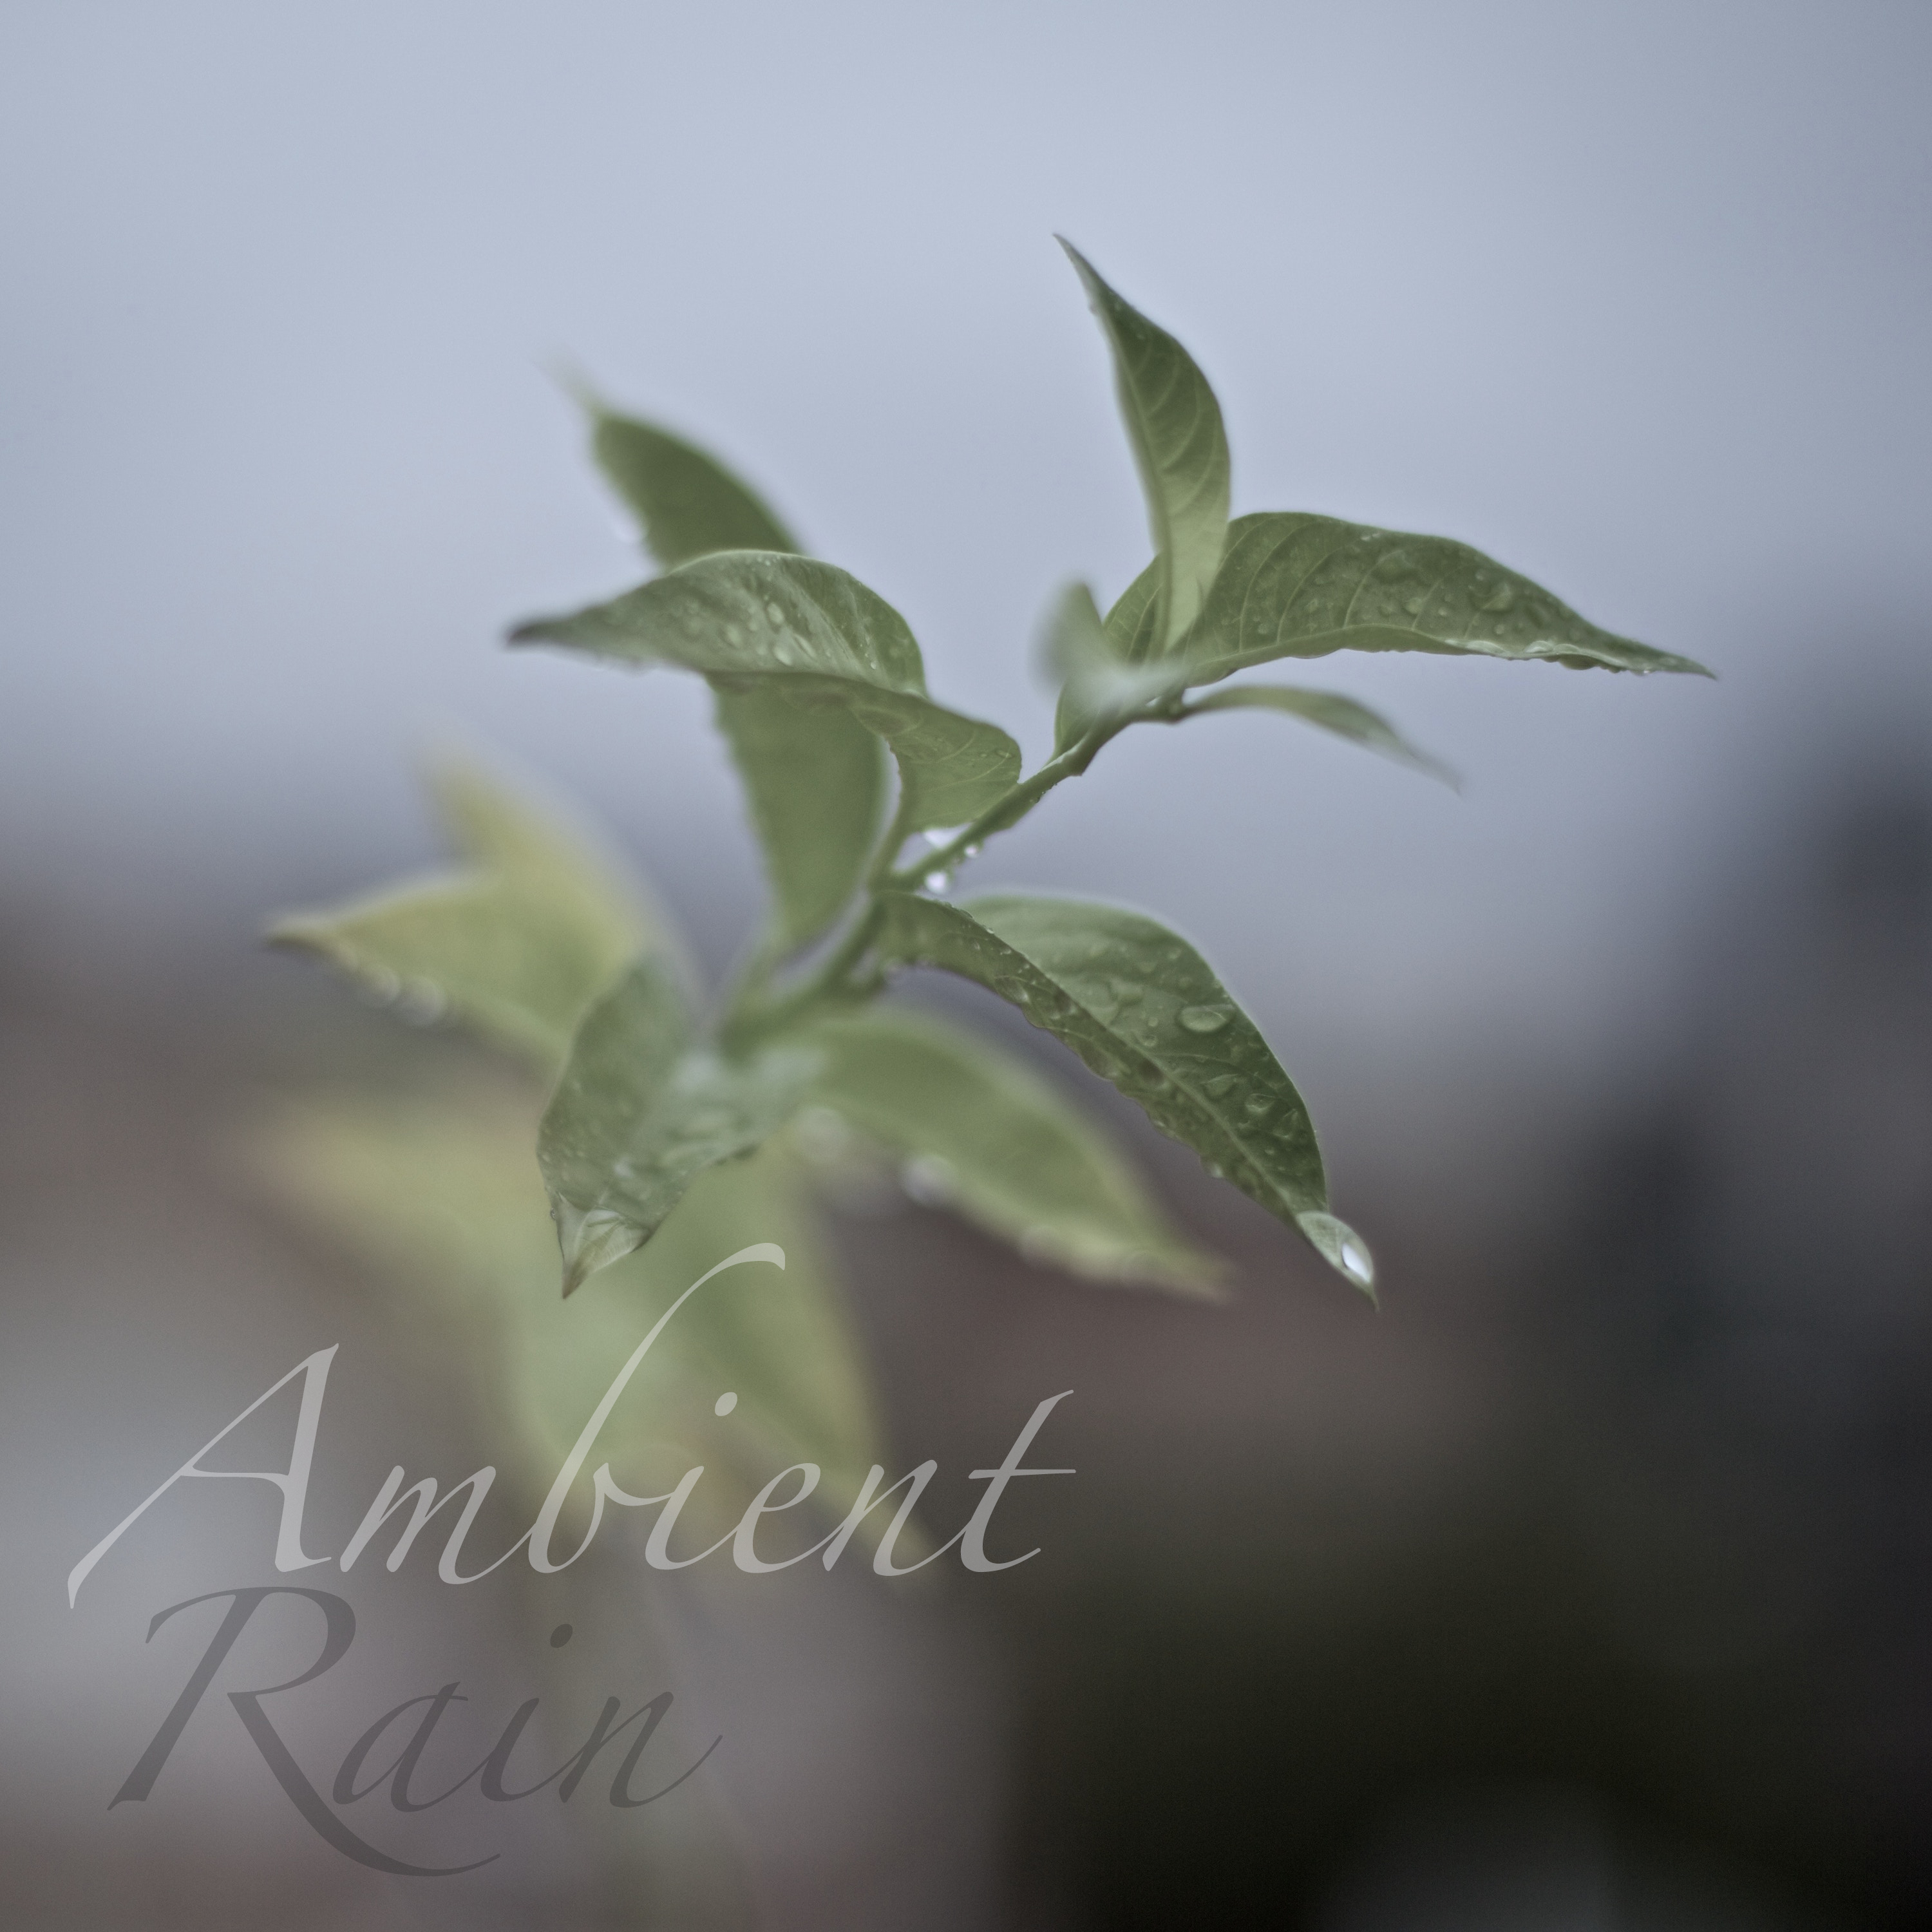 19 Ambient Rain Sounds, Ocean Sounds and Nature Sounds - Loopable with no Fades